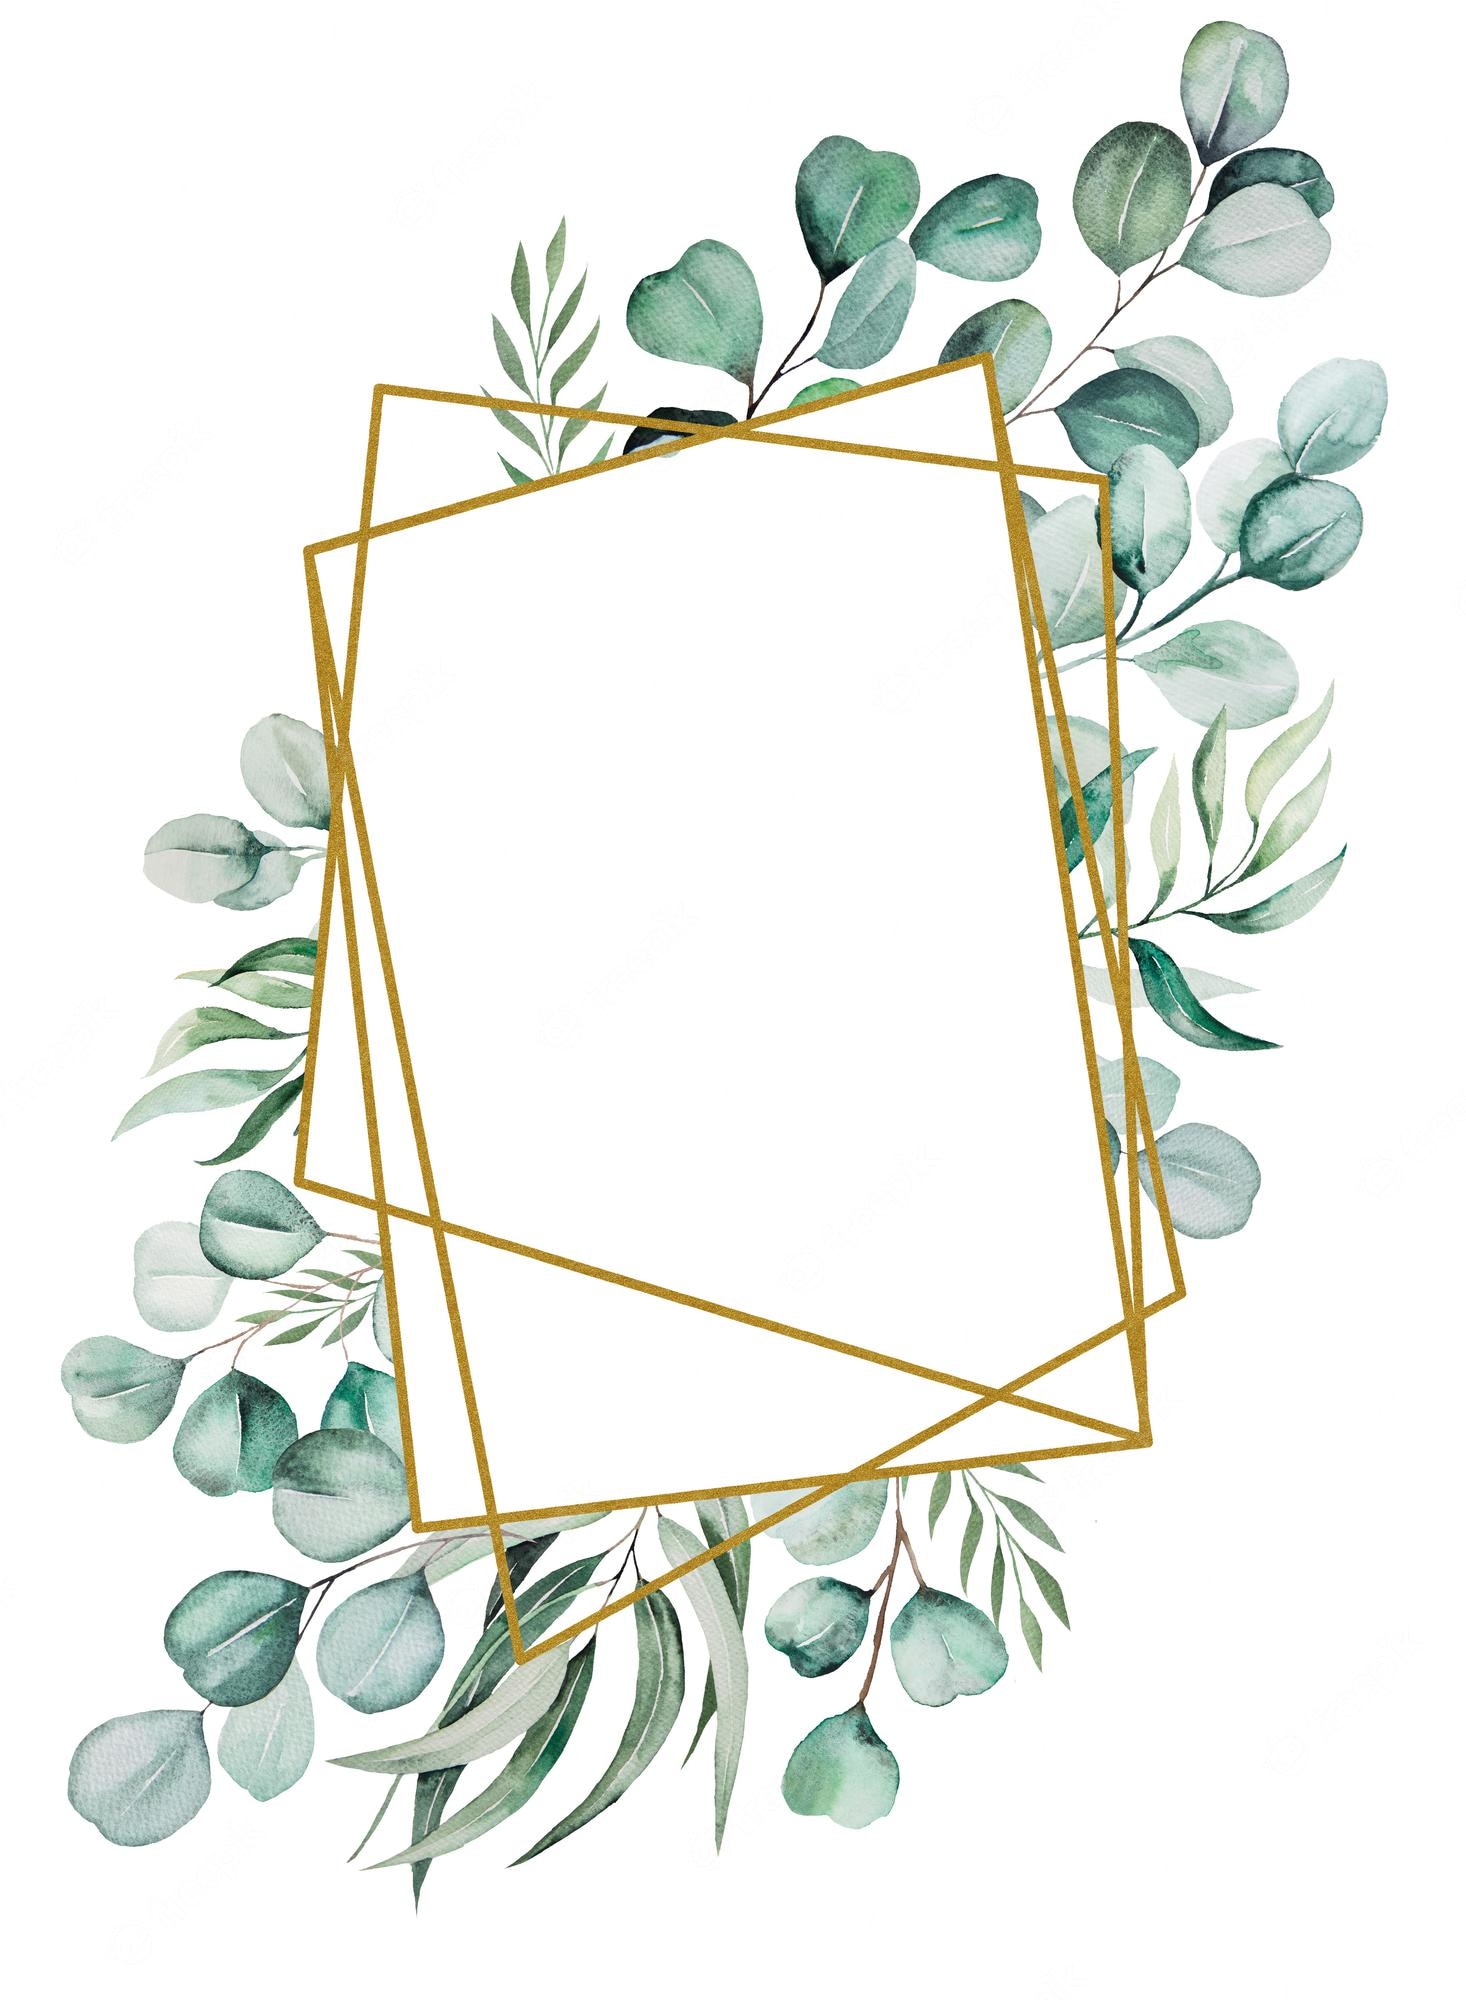 Premium Photo. Watercolor green eucaliptus branches and leaves frame illustration isolated on white for wedding stationary, greetings cards, wallpaper, crafting. rustic greenery frame. hand painted floral clip art